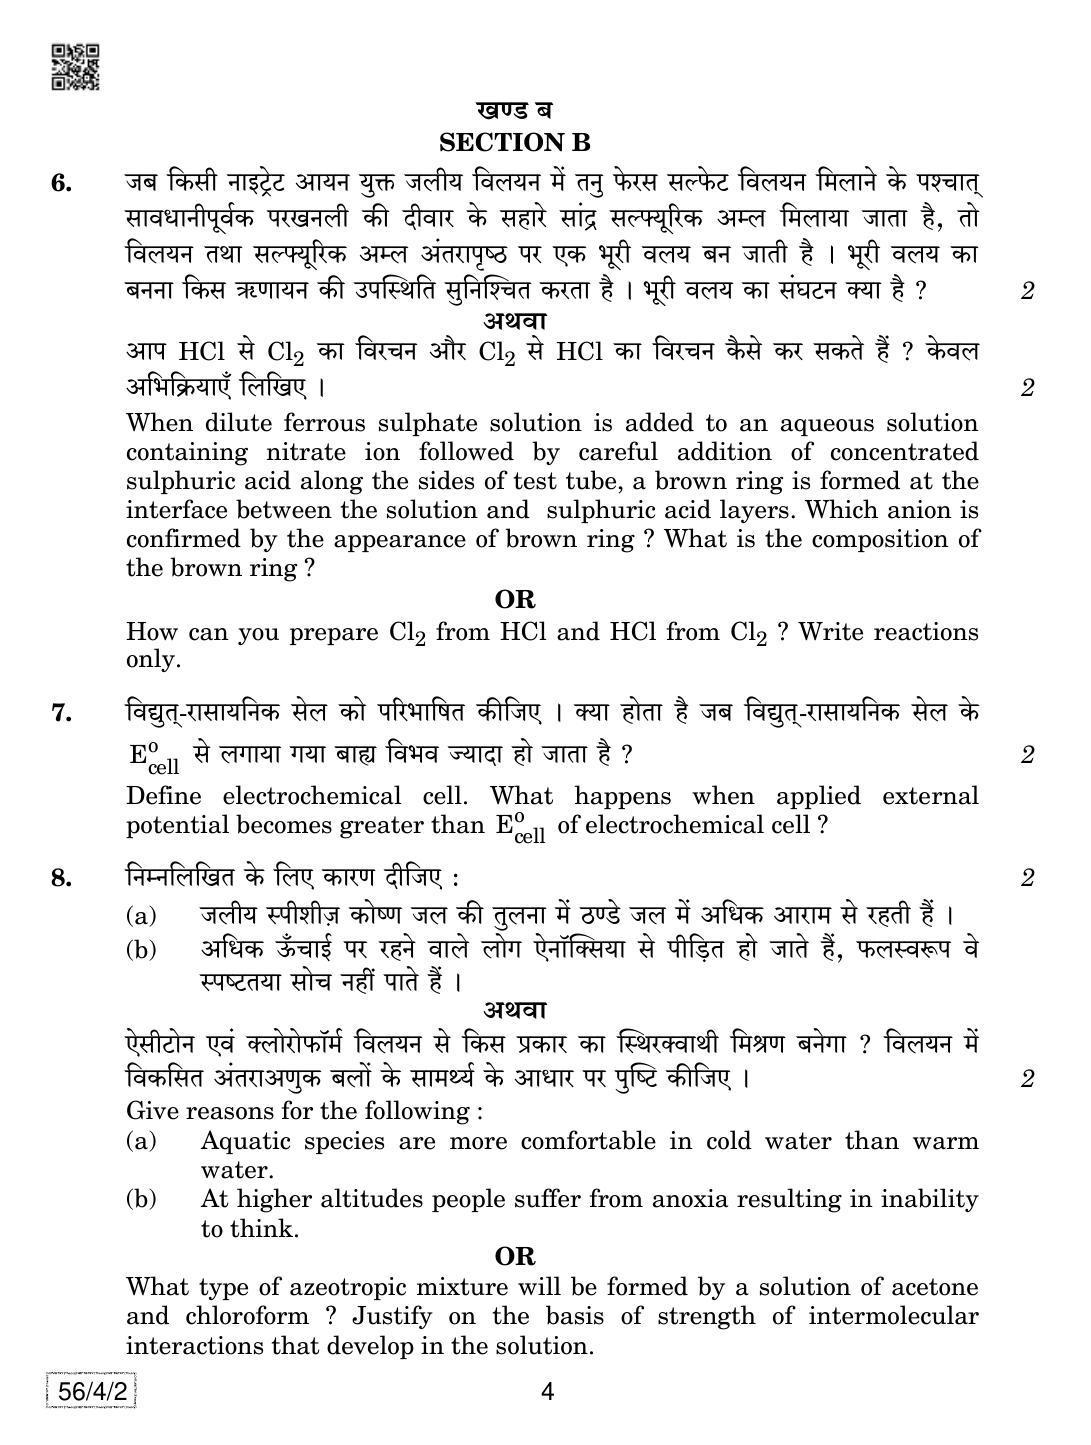 CBSE Class 12 56-4-2 Chemistry 2019 Question Paper - Page 4